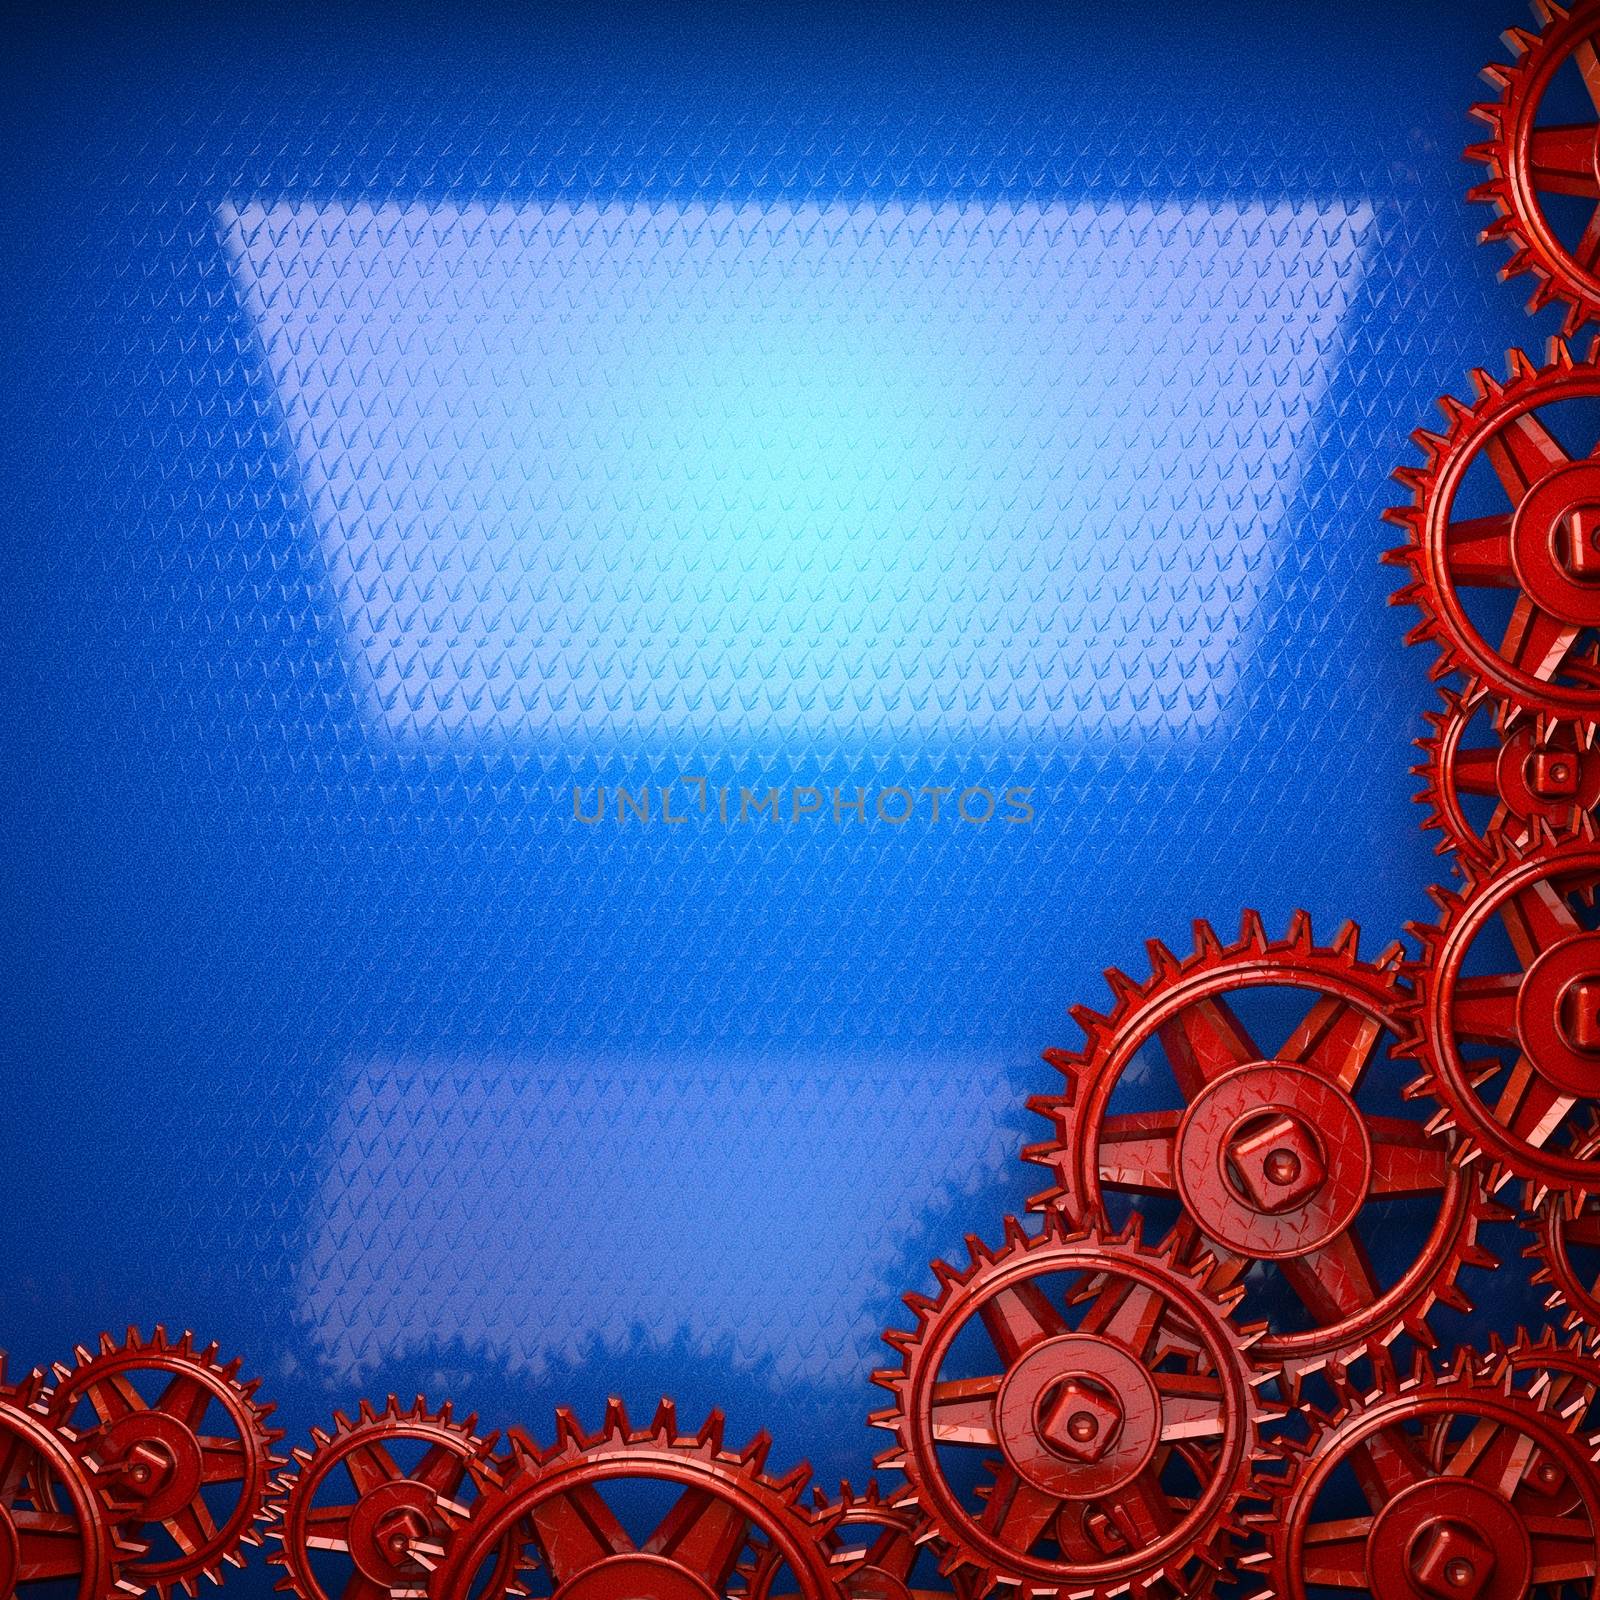 blue metal background with red cogwheel gears